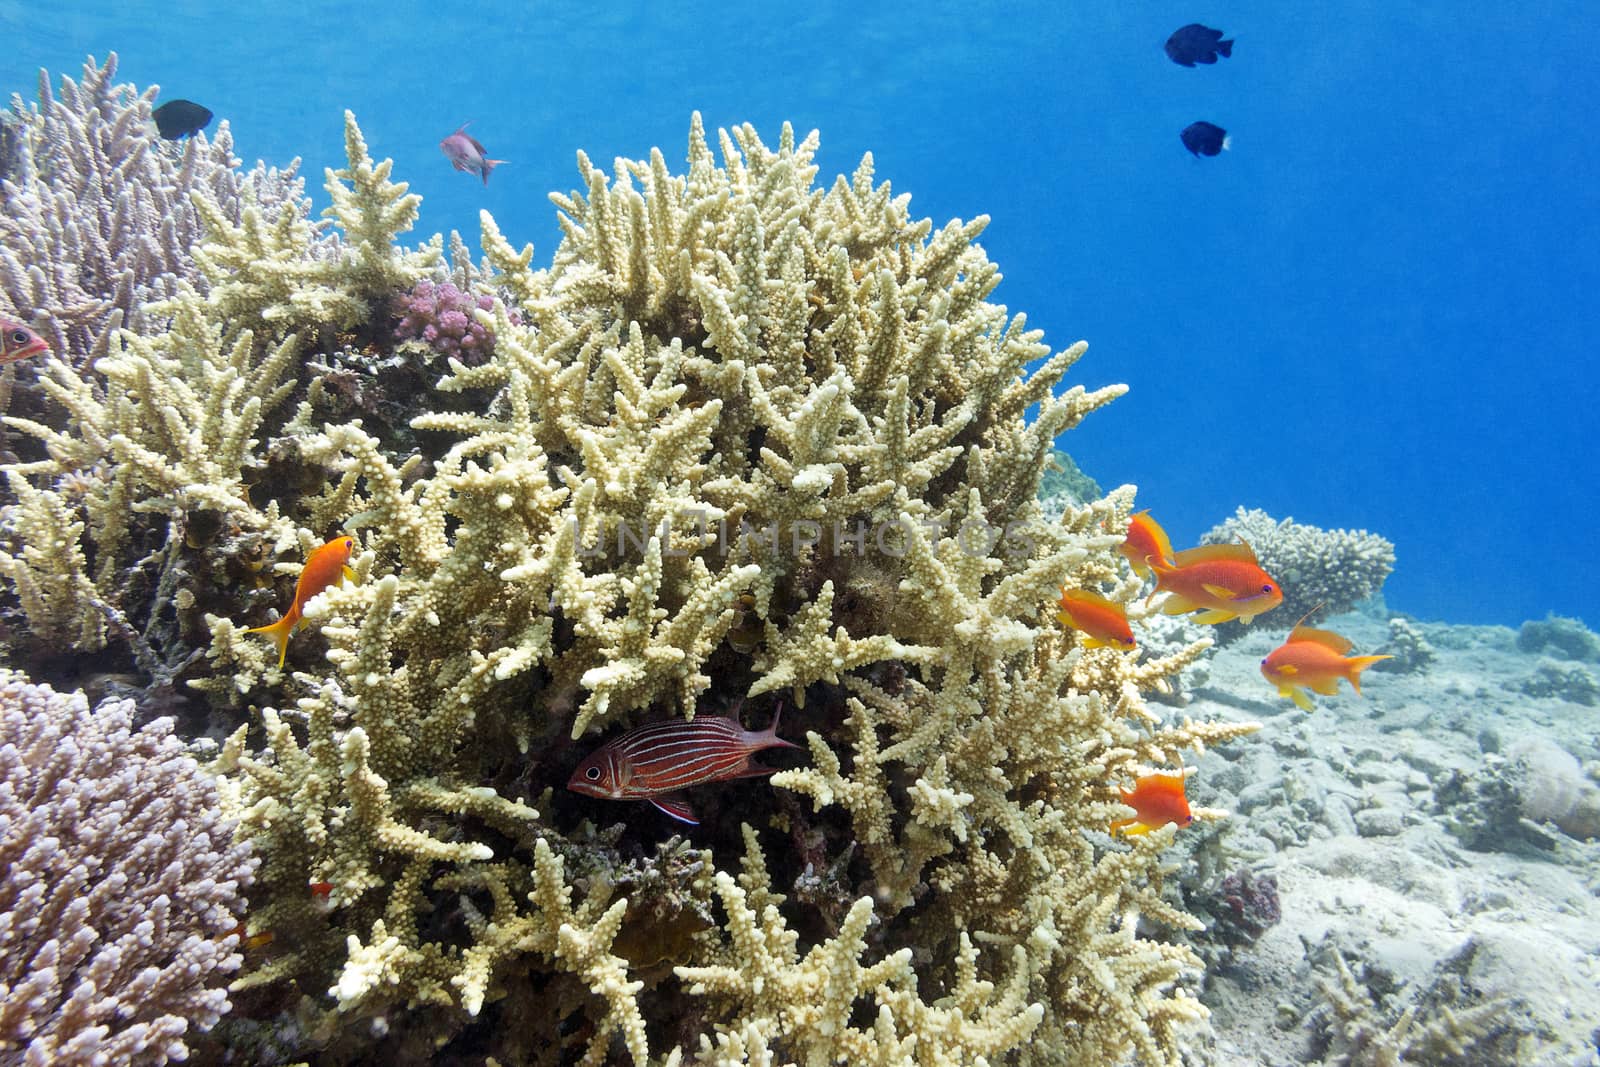 coral reef with hard corals and fishes athias in tropical sea, underwater.